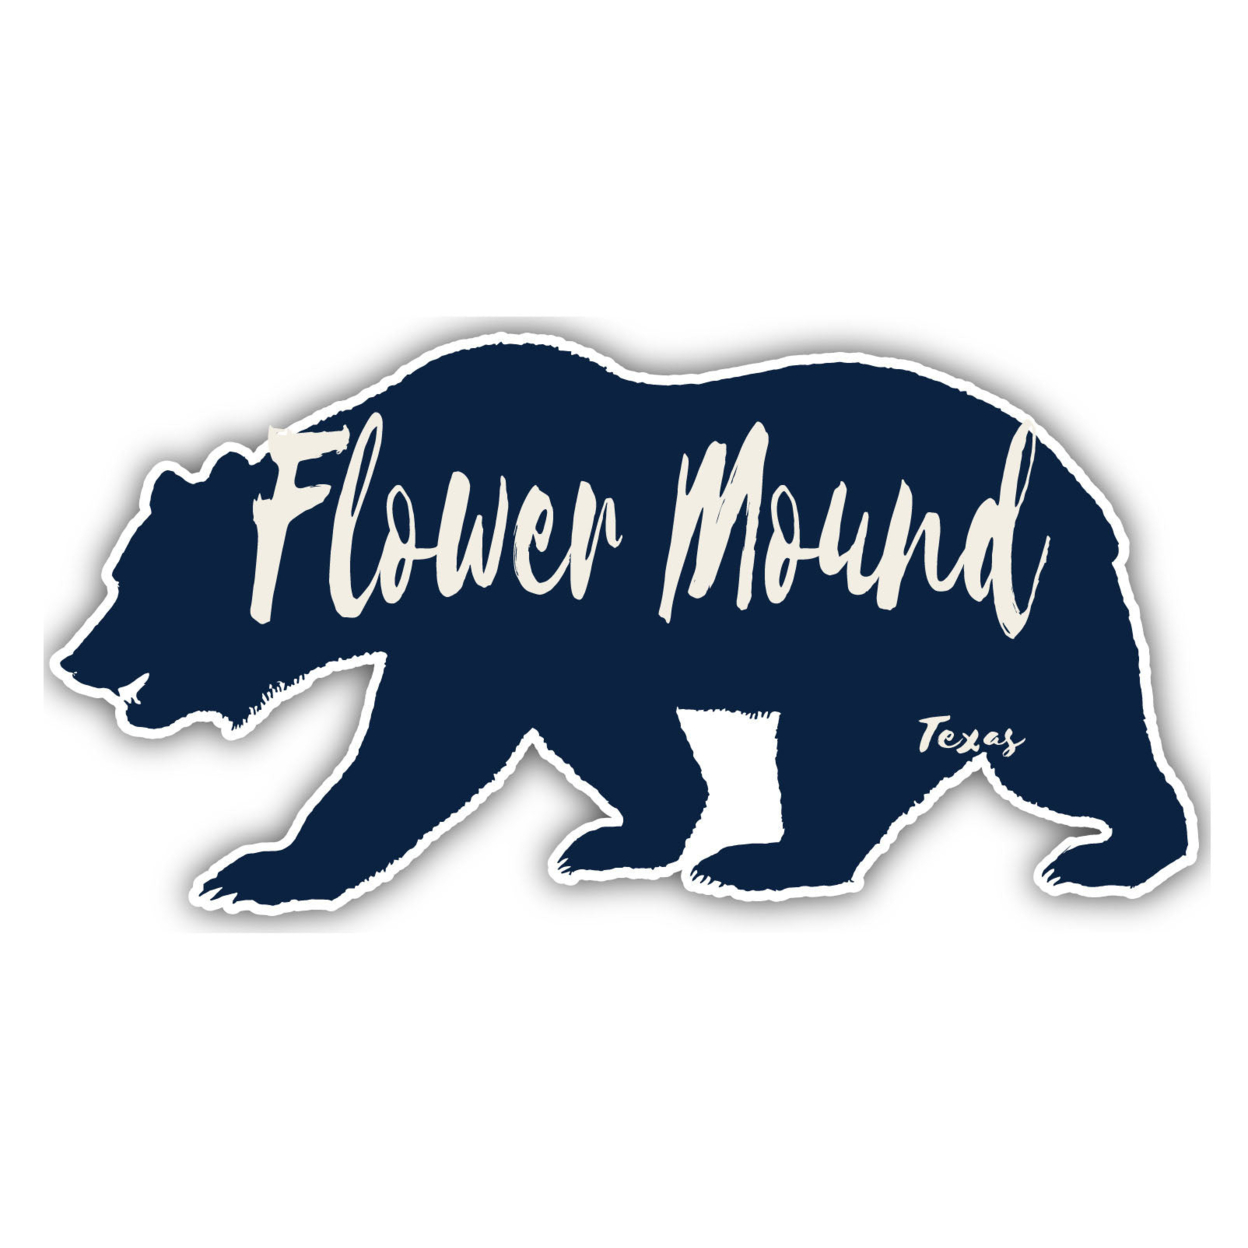 Flower Mound Texas Souvenir Decorative Stickers (Choose Theme And Size) - 4-Pack, 8-Inch, Tent